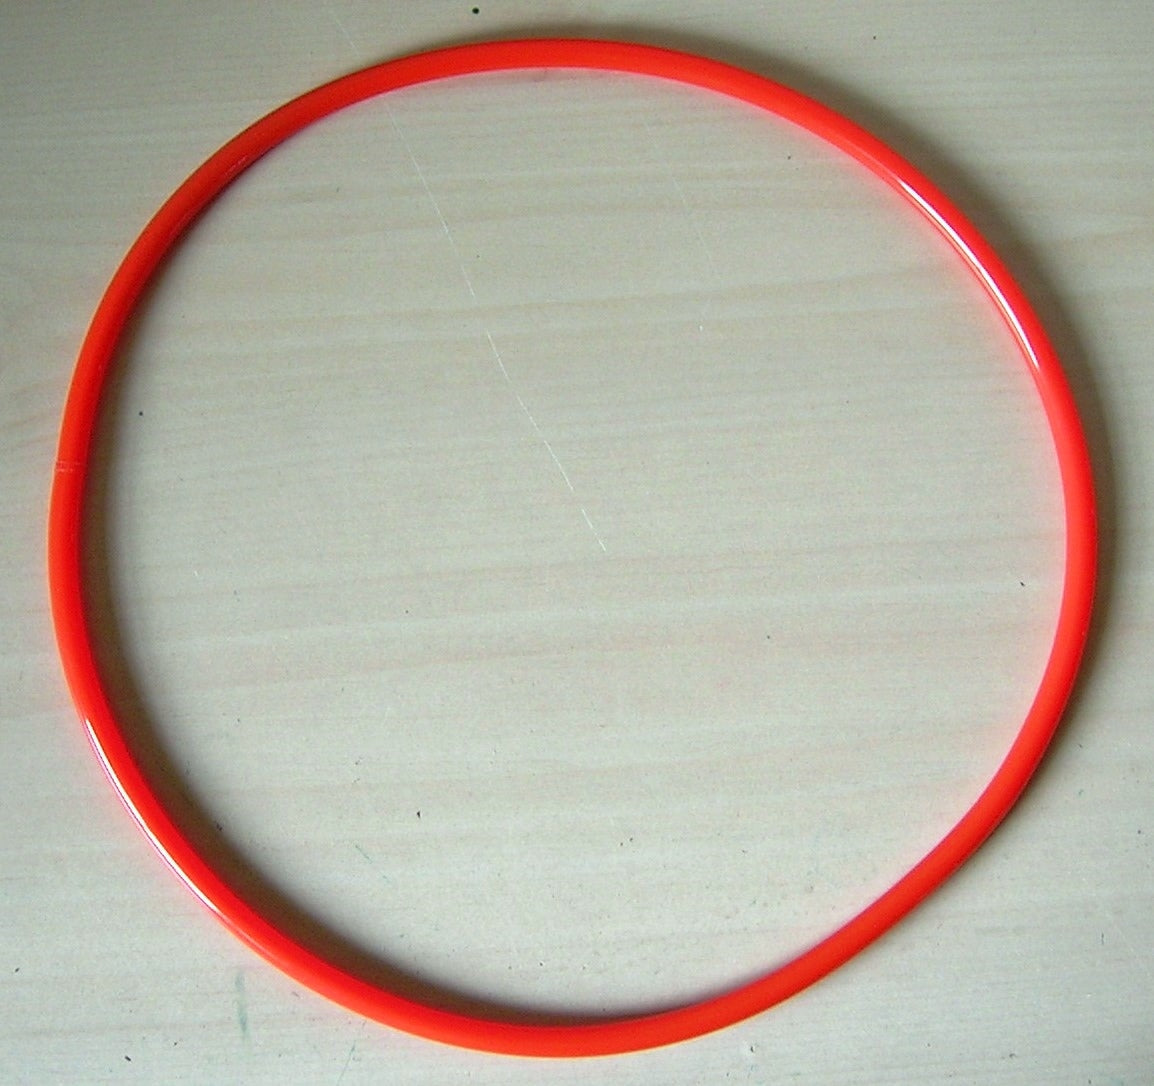 ROUND DRIVE BELT FOR CHICAGO FORGE KDS25-4147 Band Saw